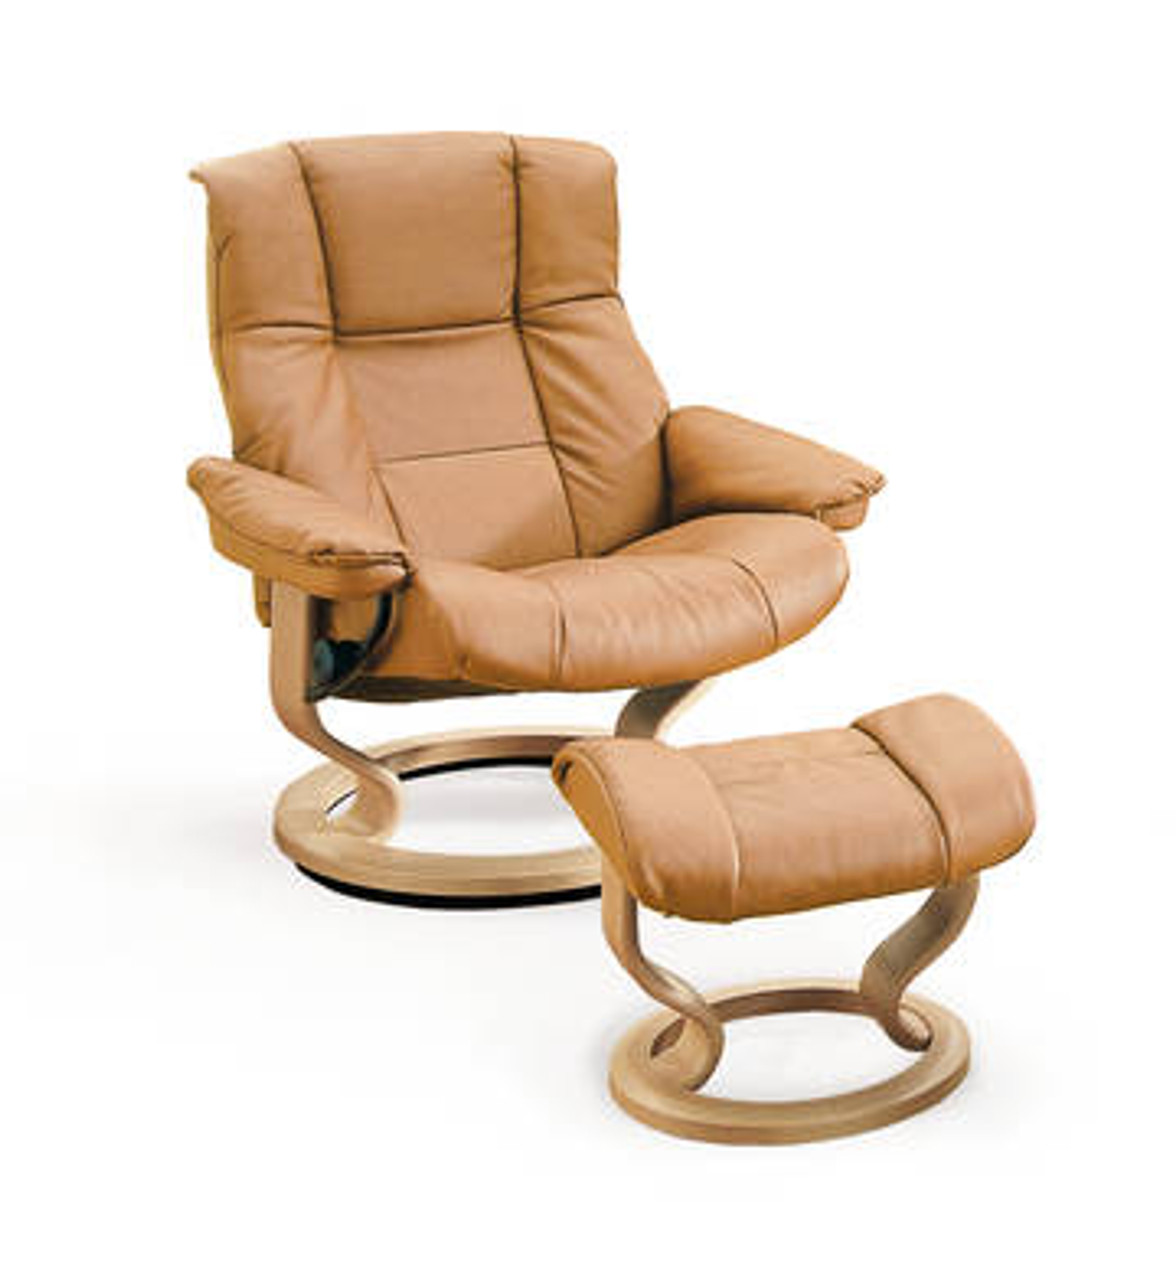 Ekornes Stressless Mayfair Recliners & Stress-free Chairs Delivery 